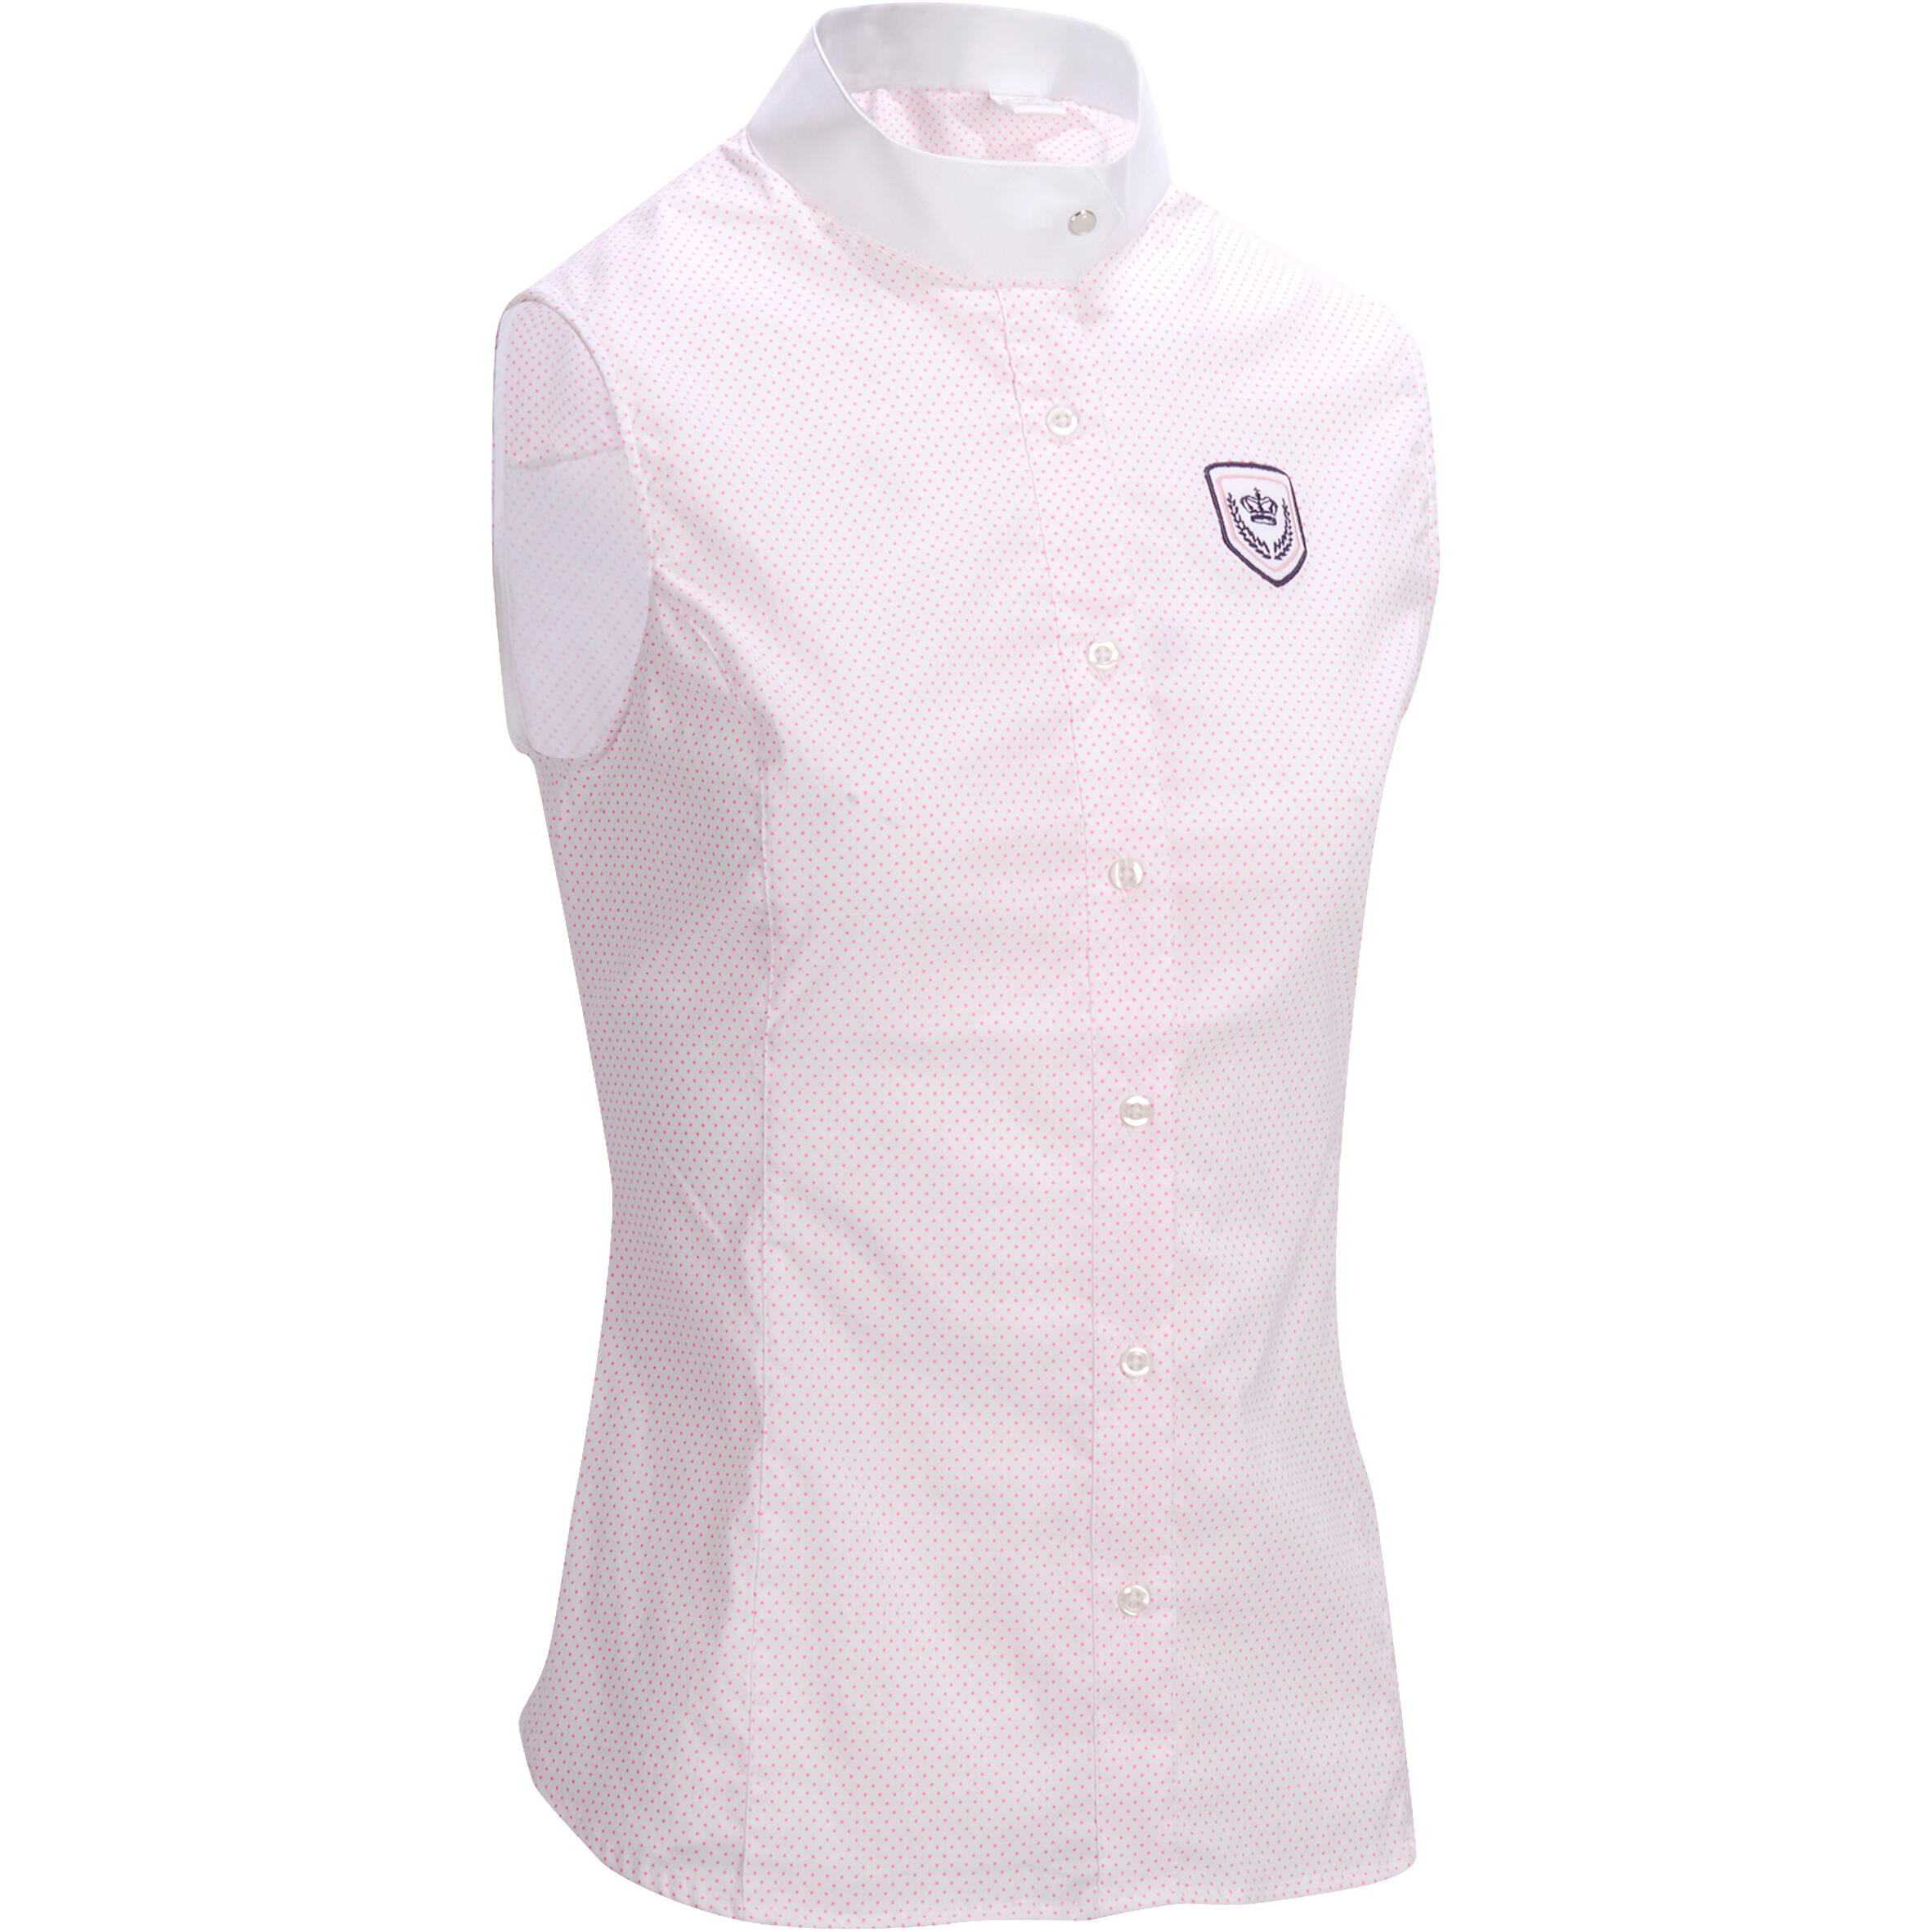 OKKSO Women's Sleeveless Horse Riding Competition Shirt - White/Pink Dots